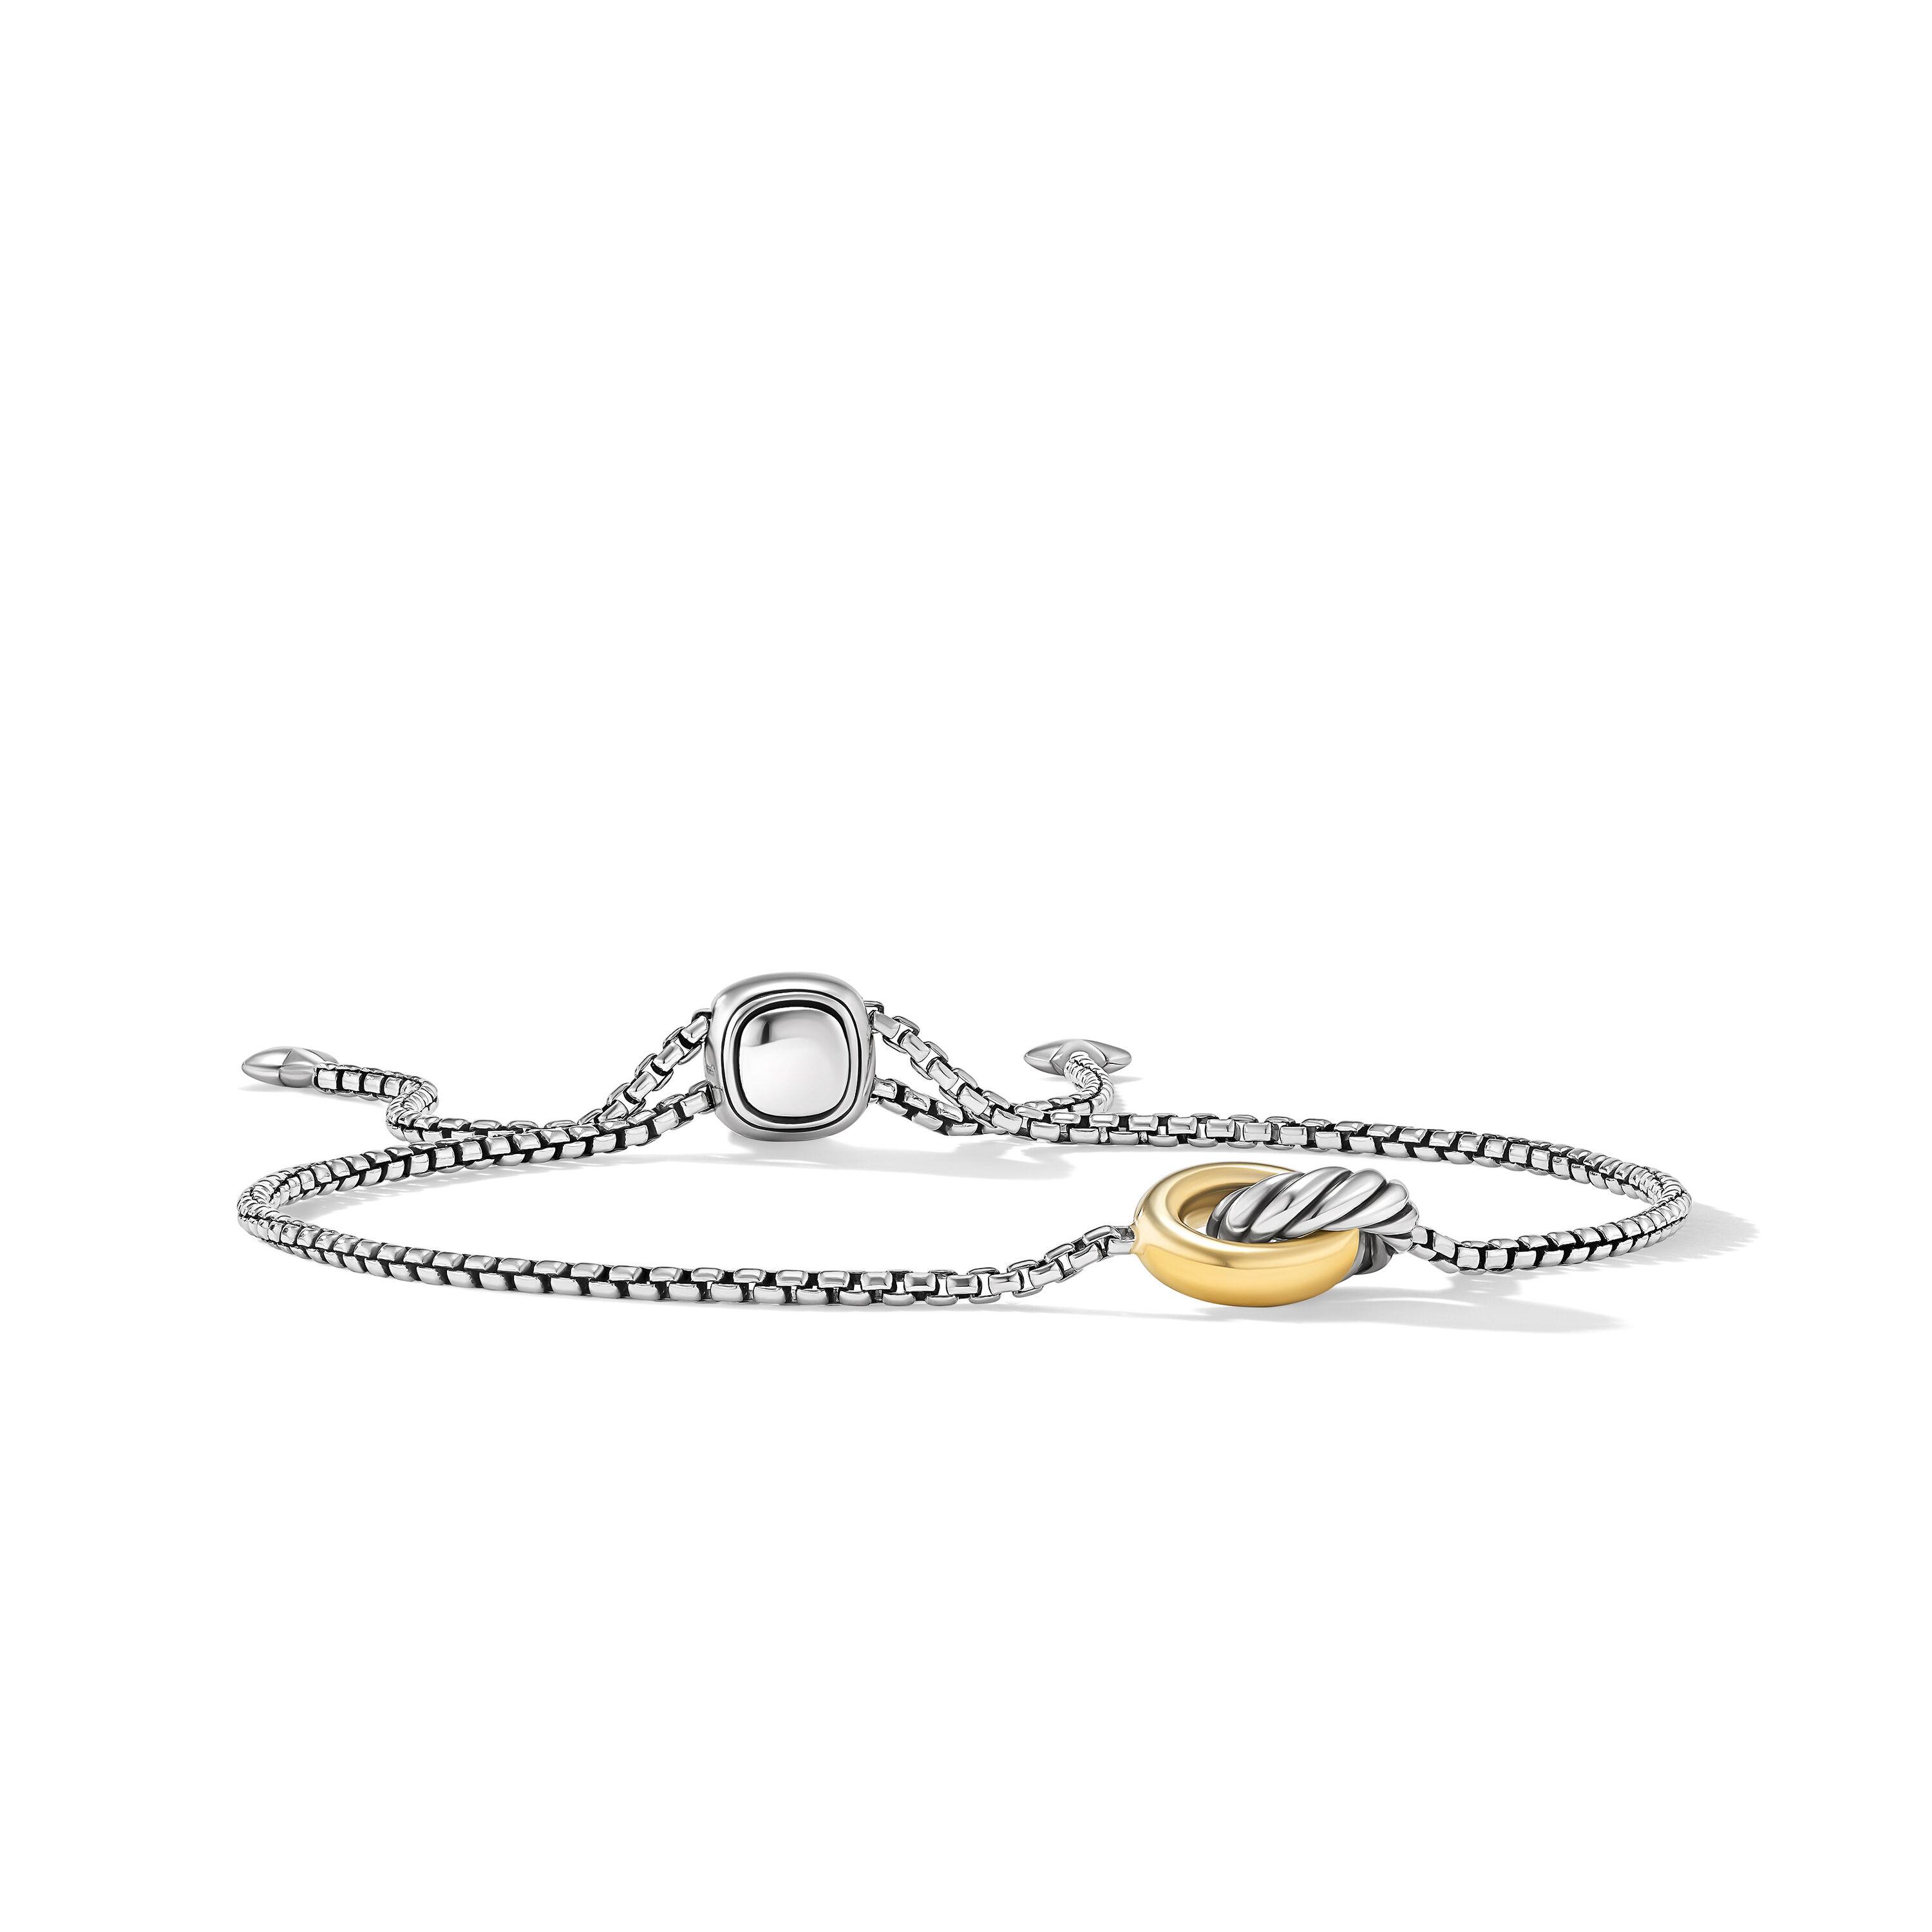 David Yurman Petite Cable Linked Bracelet in Sterling Silver with 14K Yellow Gold